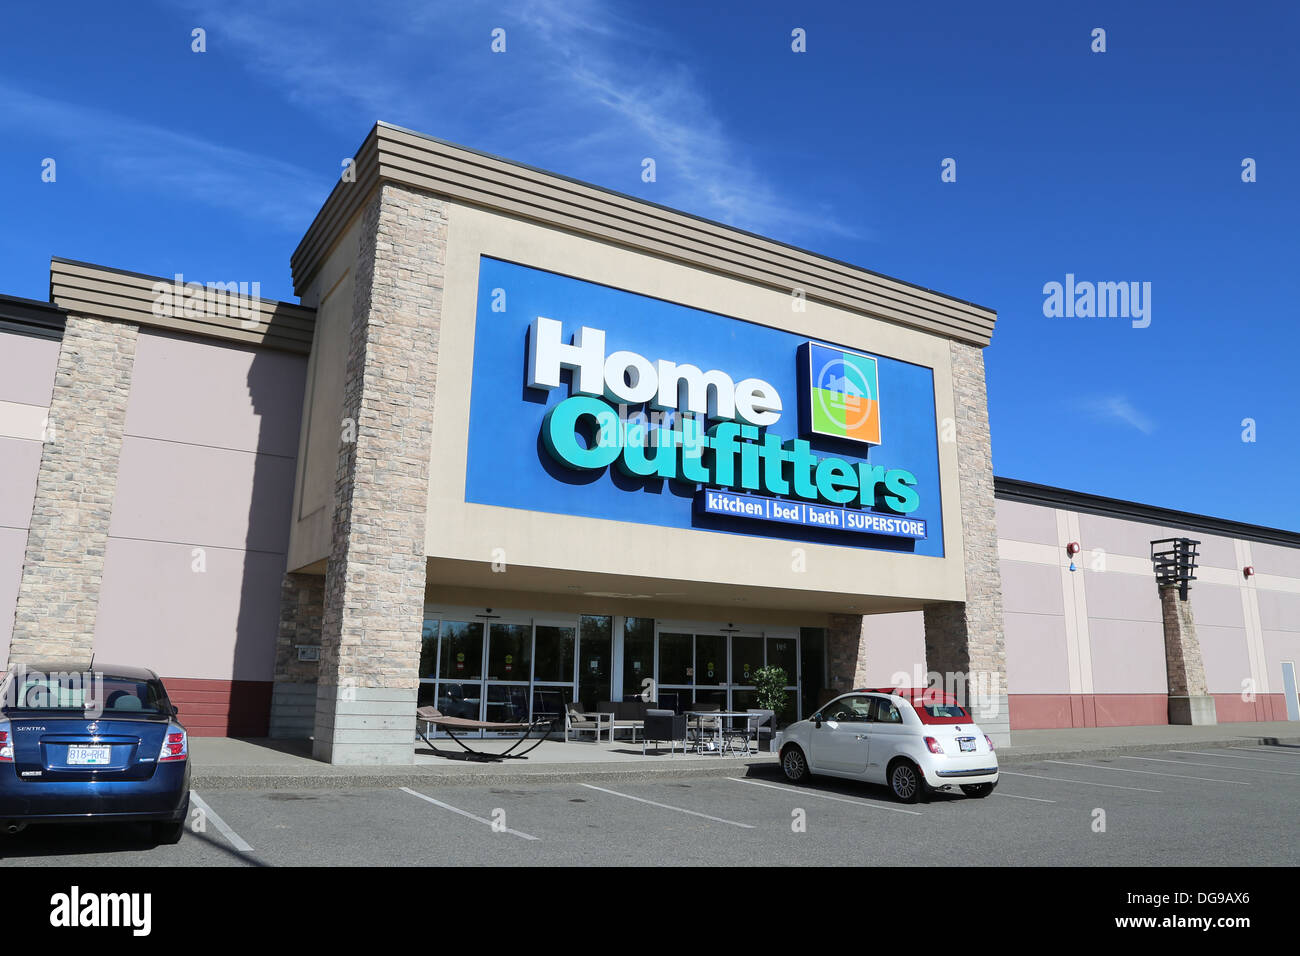 Nach Hause Outfitters Furnture Shop Stockfoto